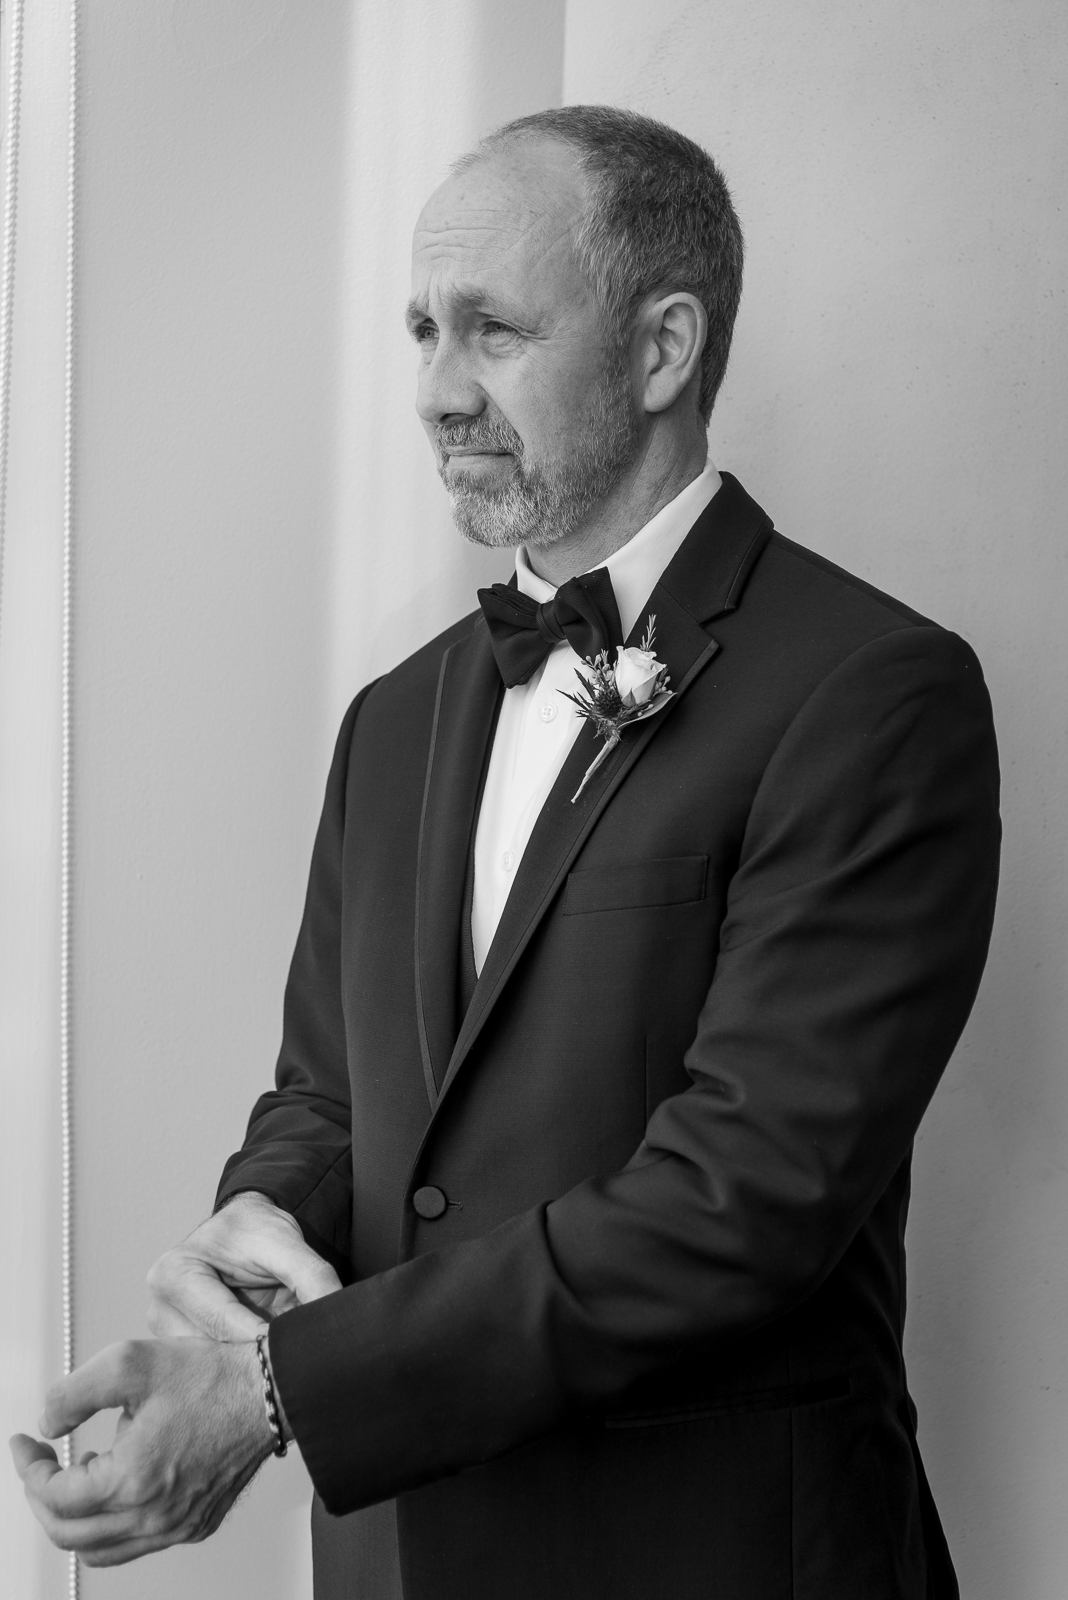 Groom getting ready, wedding preparation, groom portrait, serious, stately, black and white, classic look, older groom, urban wedding ceremony at Penthouse Events, Ohio City, Cleveland Flats